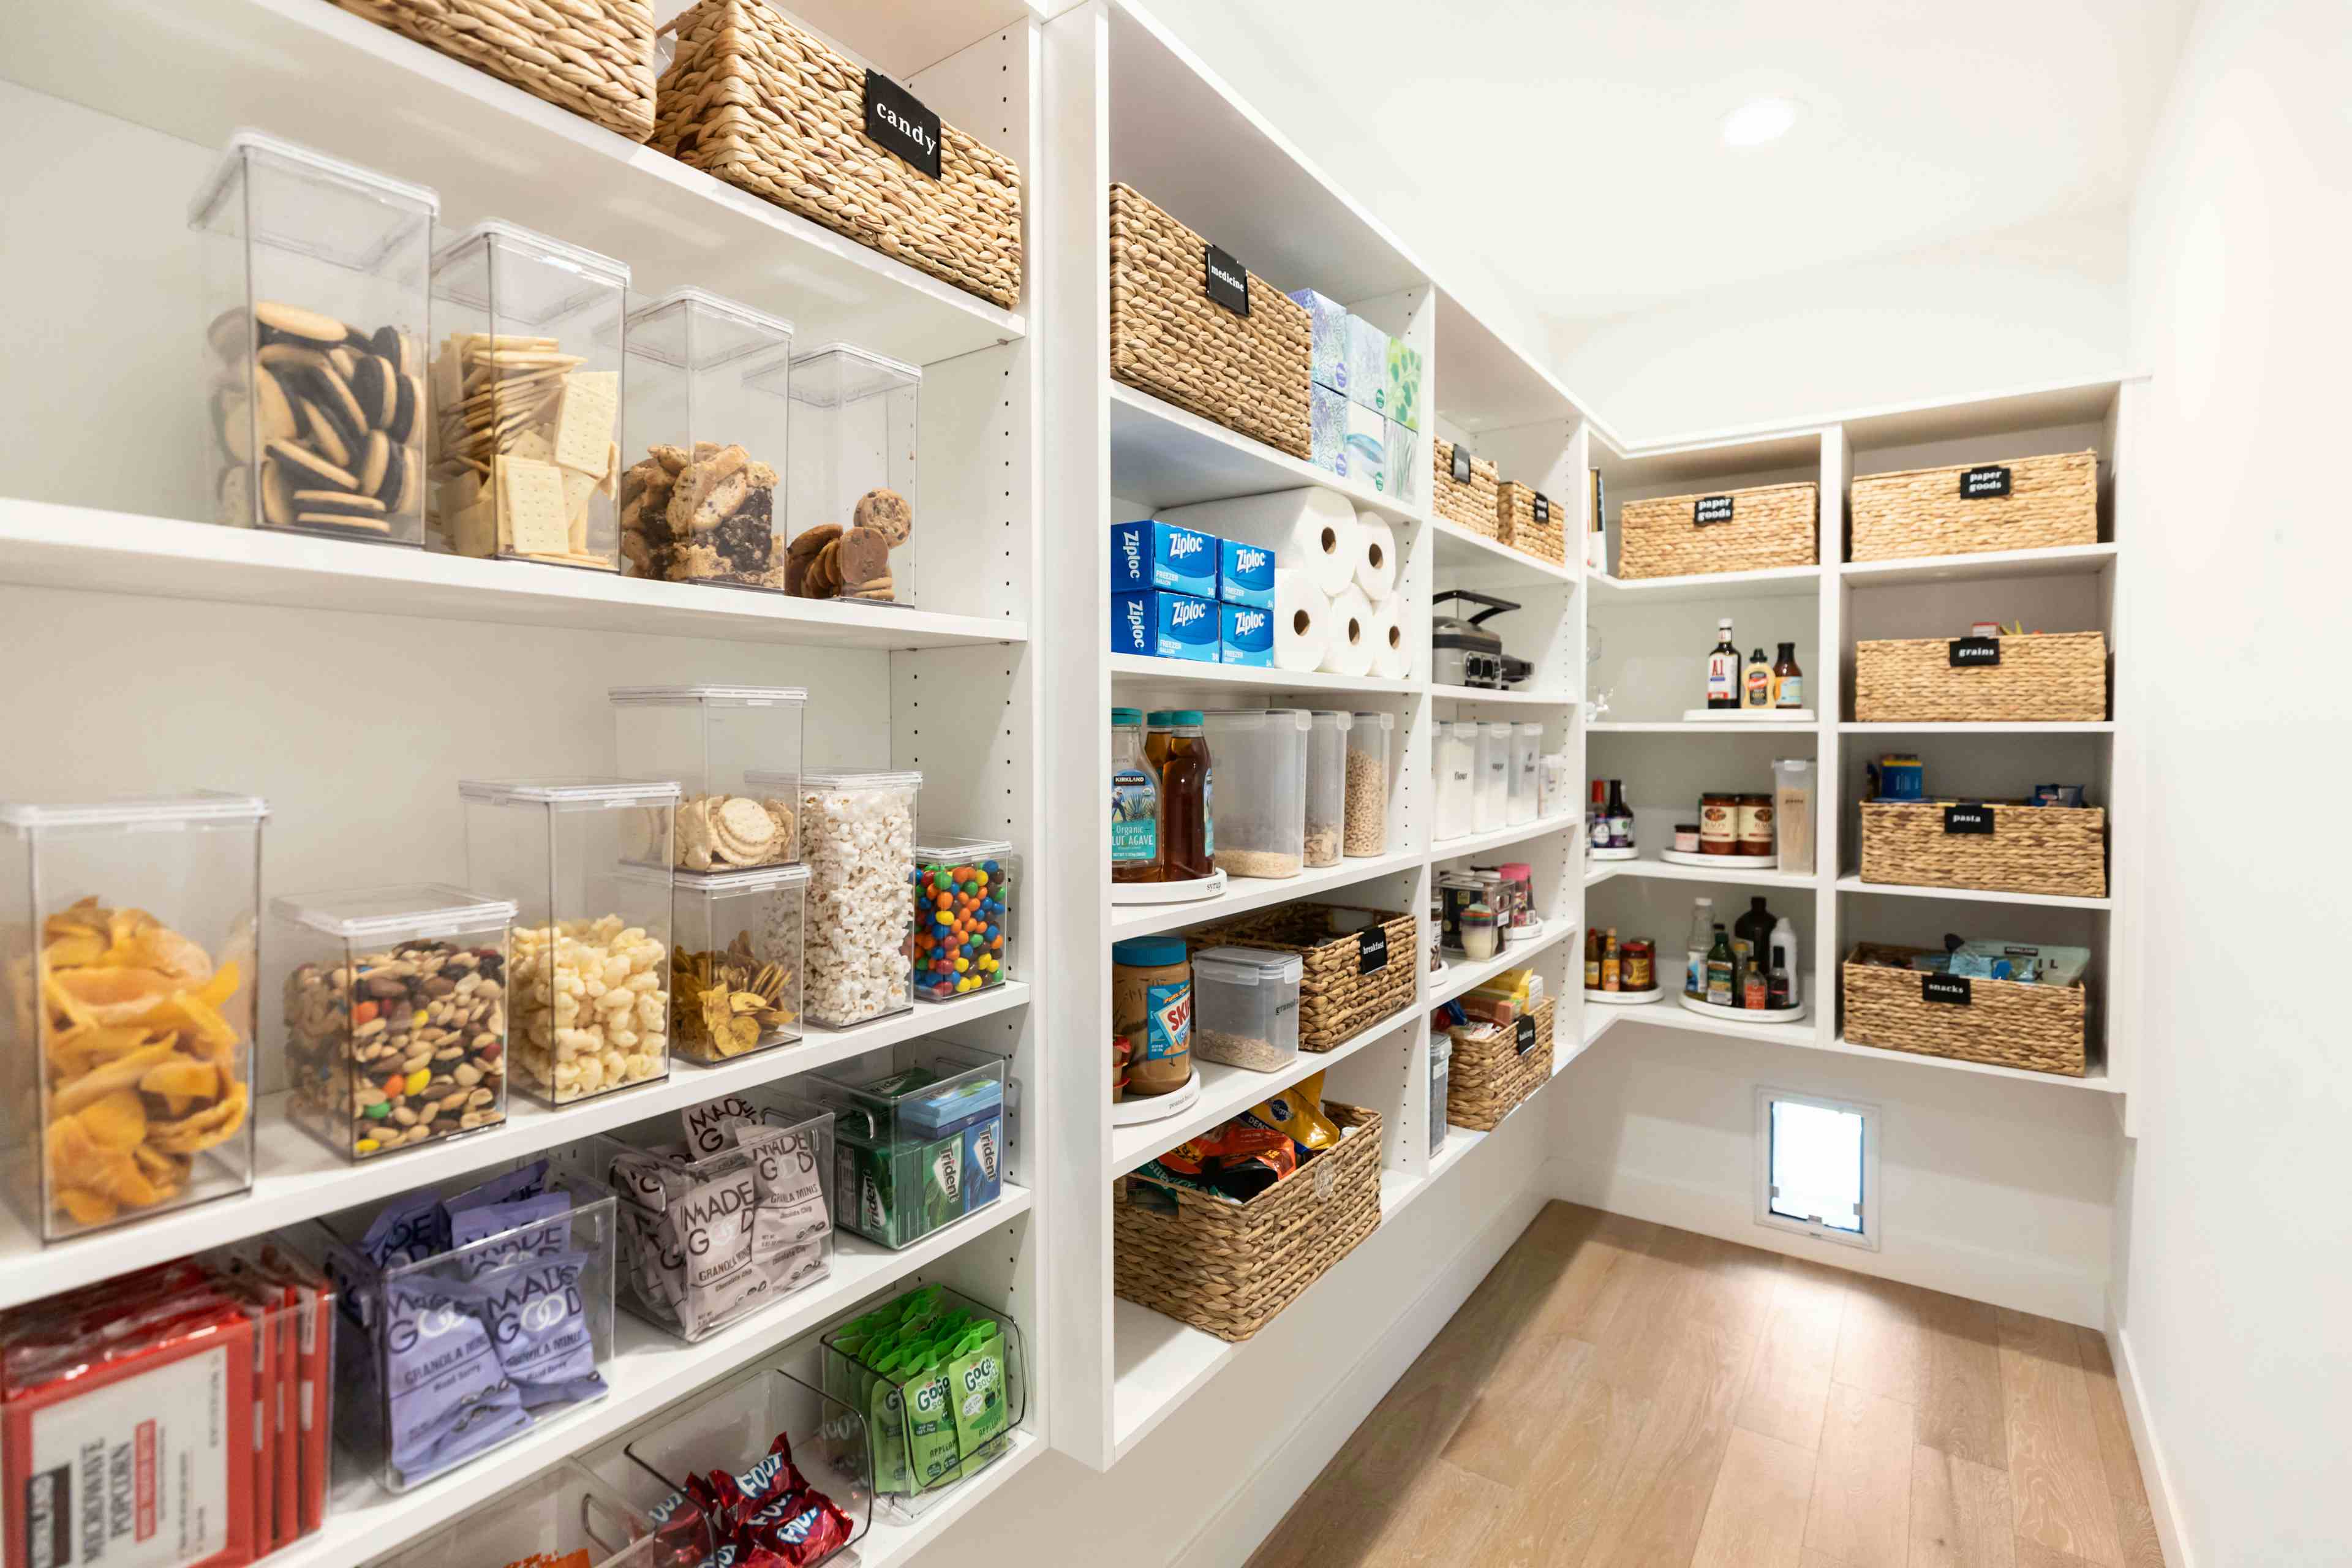 example of Pantry work